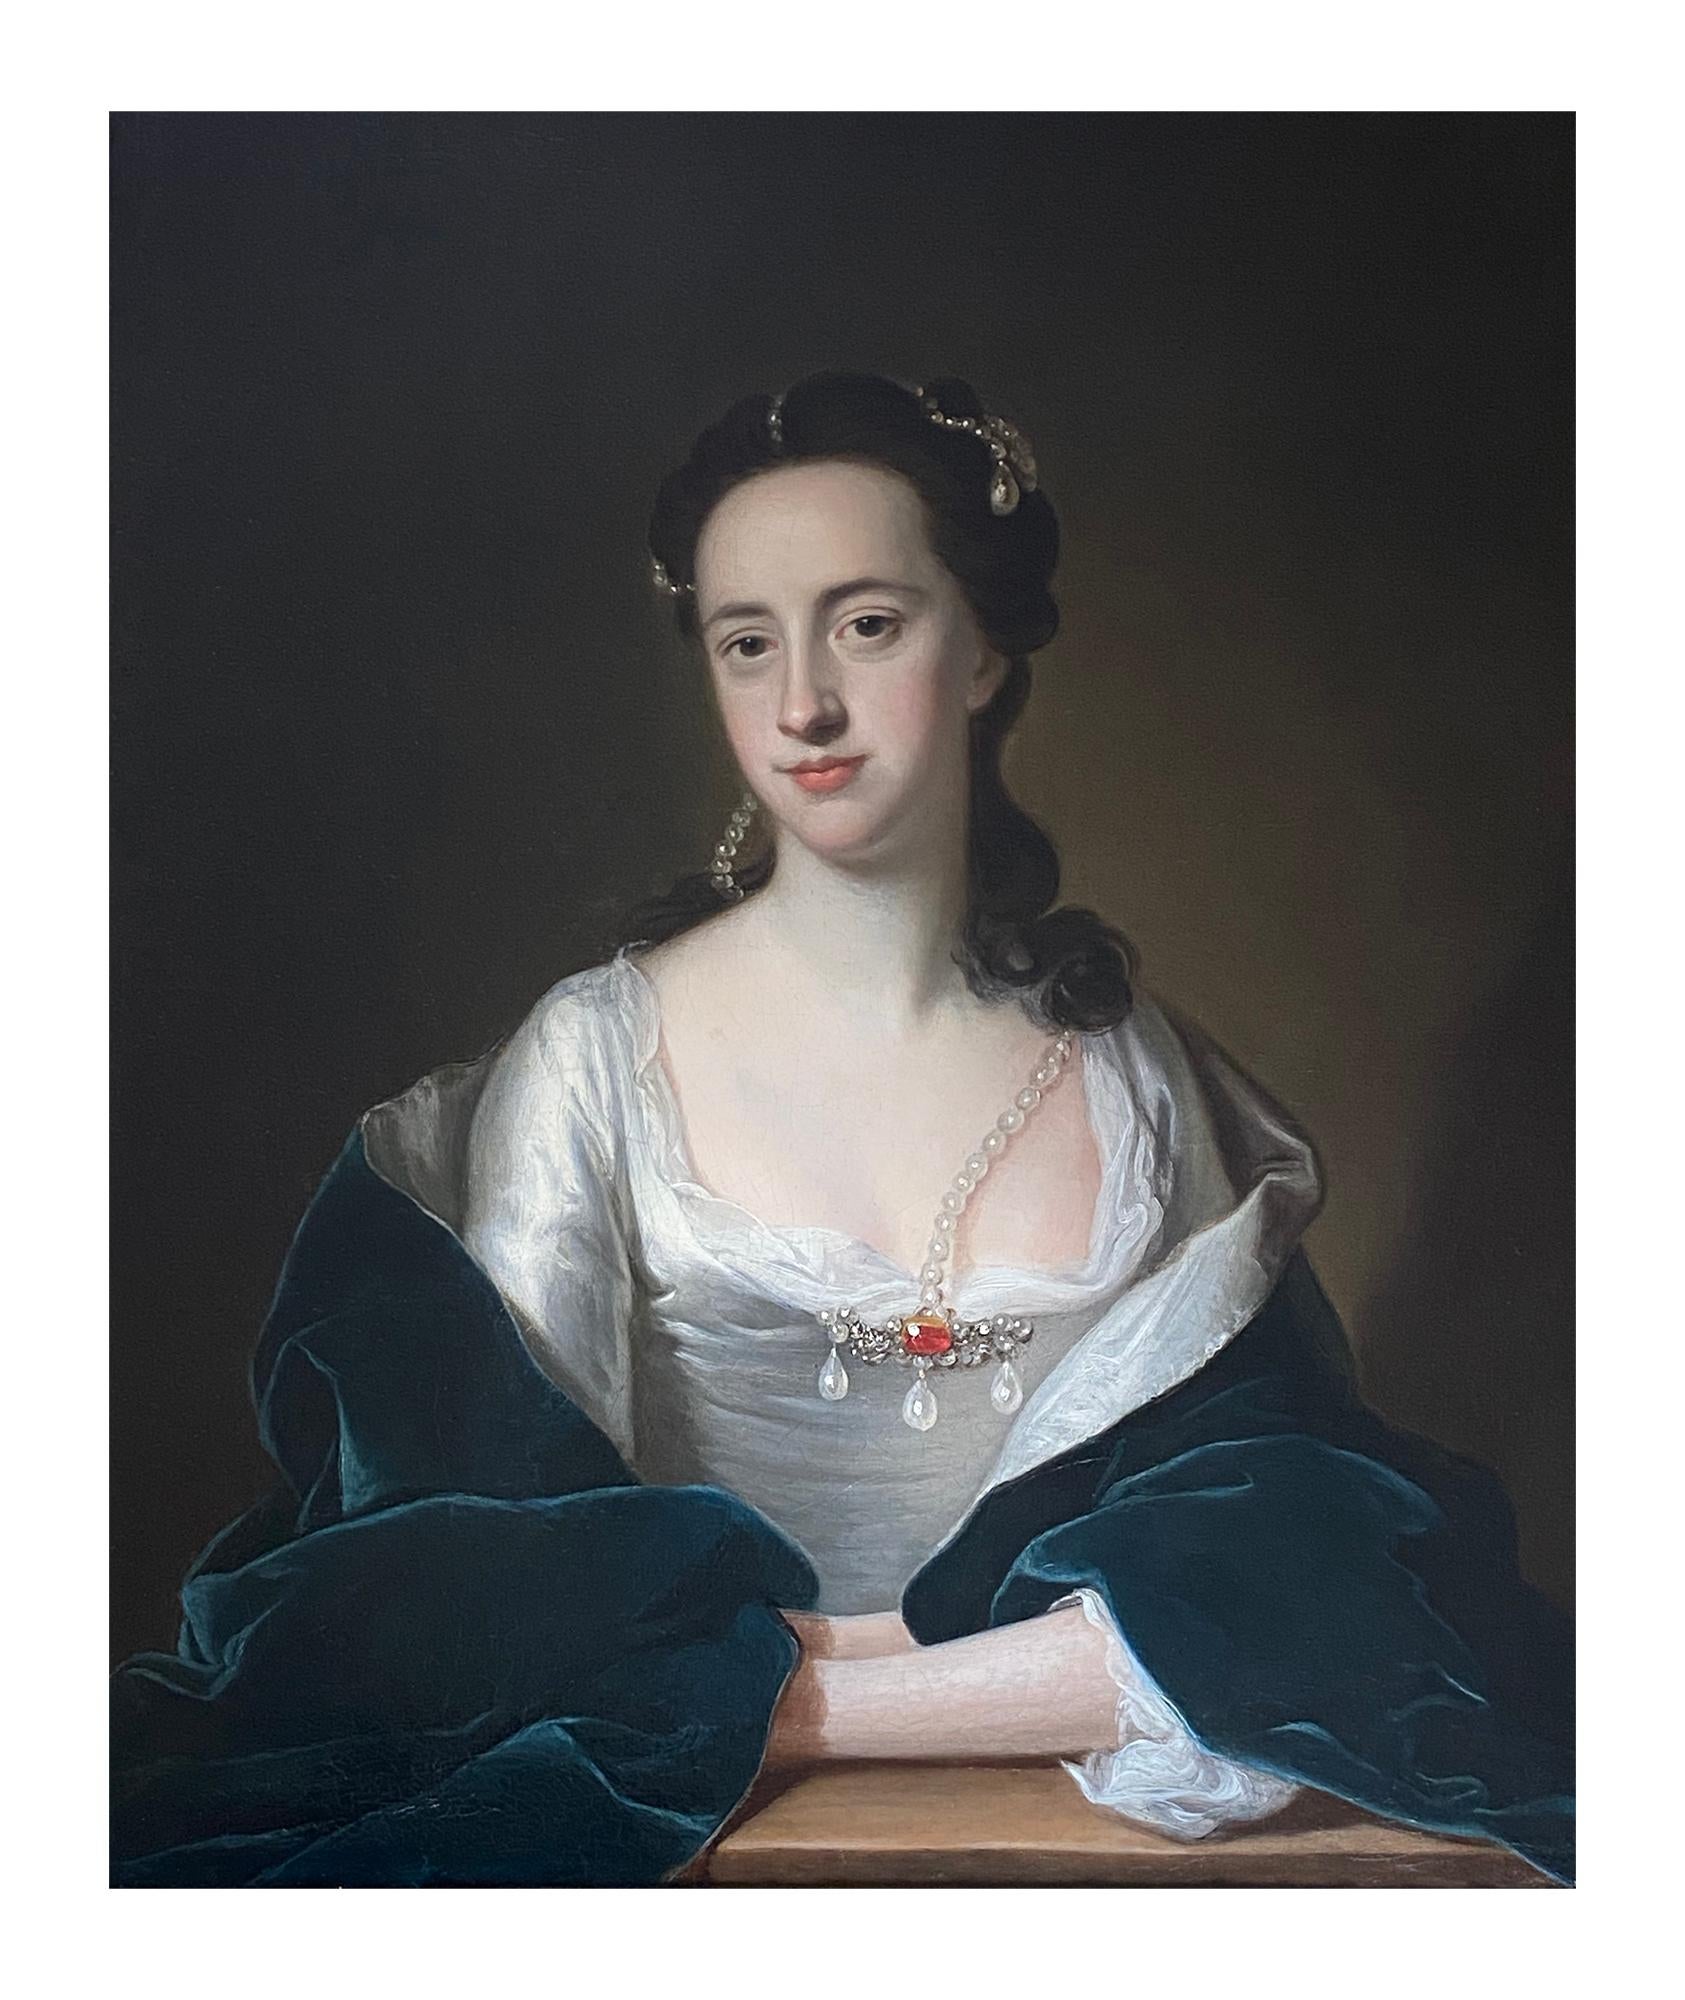 18TH CENTURY ENGLISH PORTRAIT OF A LADY IN WHITE DRESS AND BLUE CLOAK  - Painting by Thomas Hudson